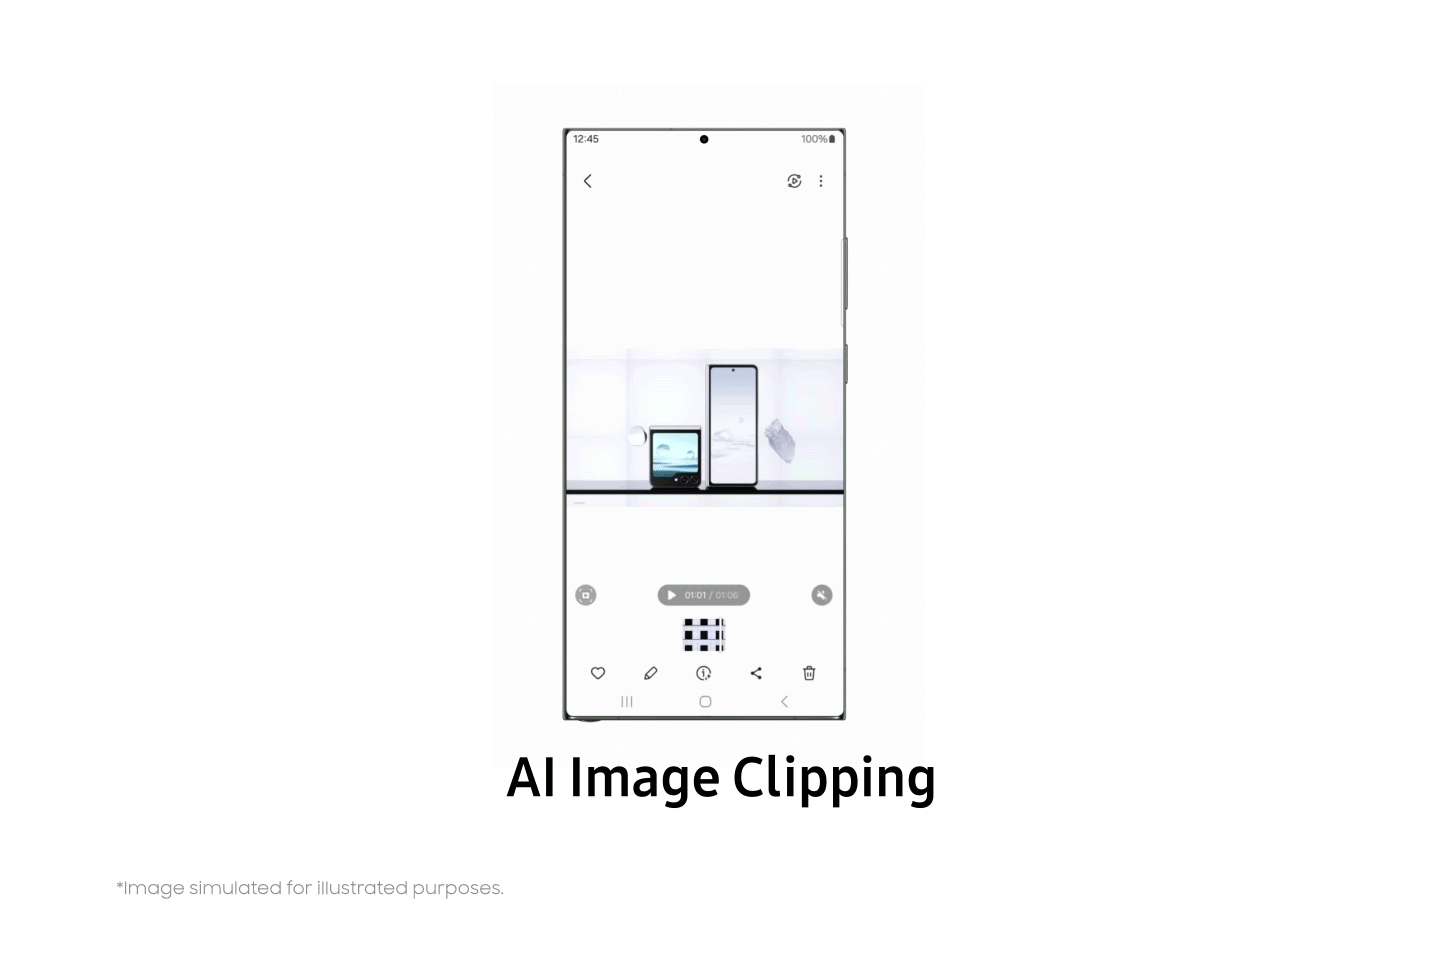 One UI 6 AI Image Clipping